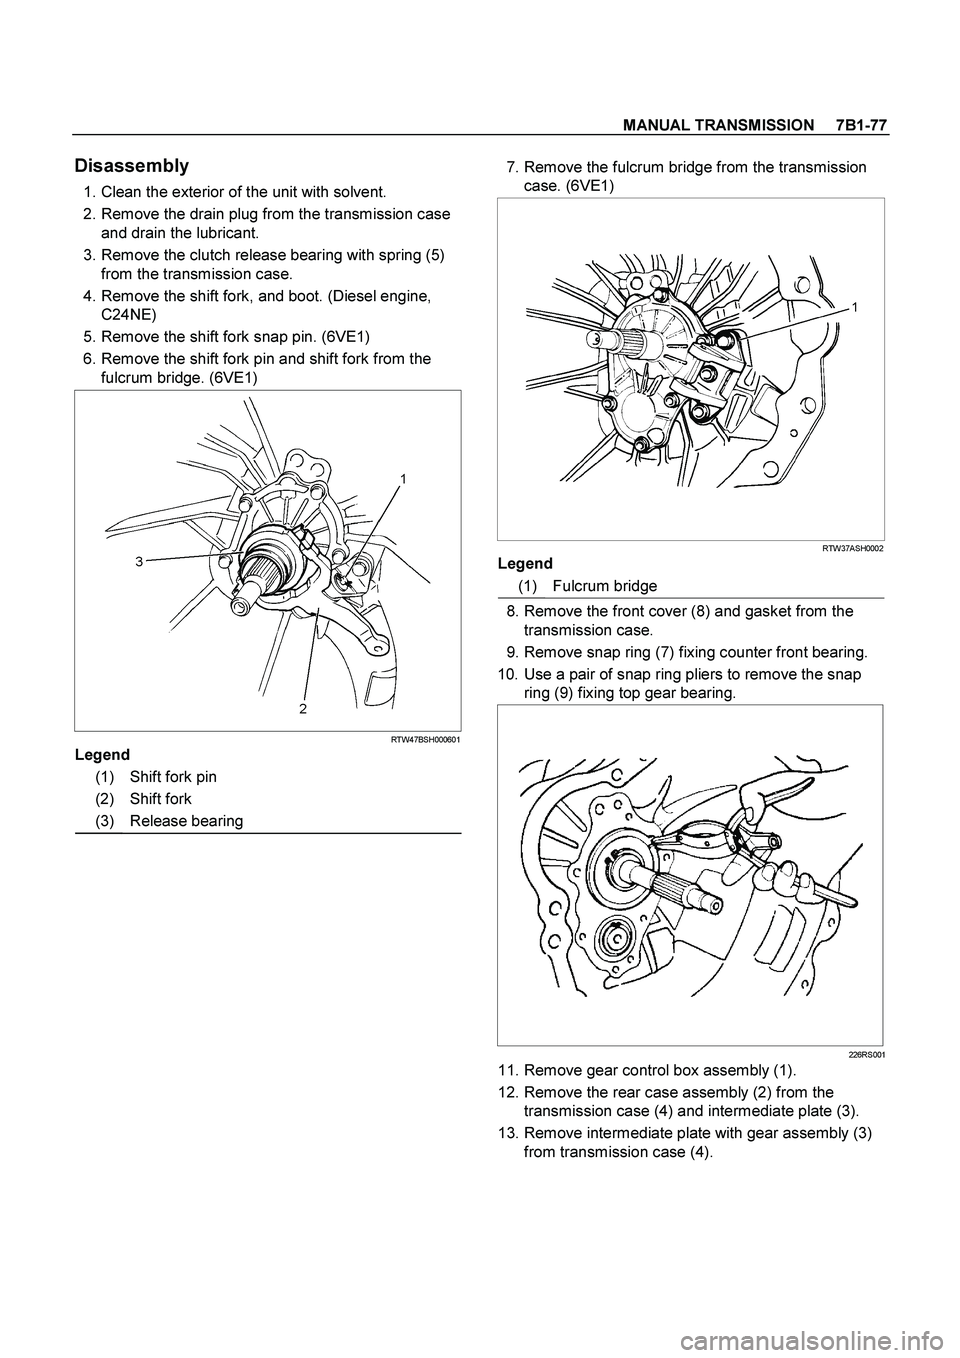 ISUZU TF SERIES 2004  Workshop Manual MANUAL TRANSMISSION     7B1-77
 
Disassembly 
  1. Clean the exterior of the unit with solvent. 
  2. Remove the drain plug from the transmission case 
and drain the lubricant. 
  3. Remove the clutch